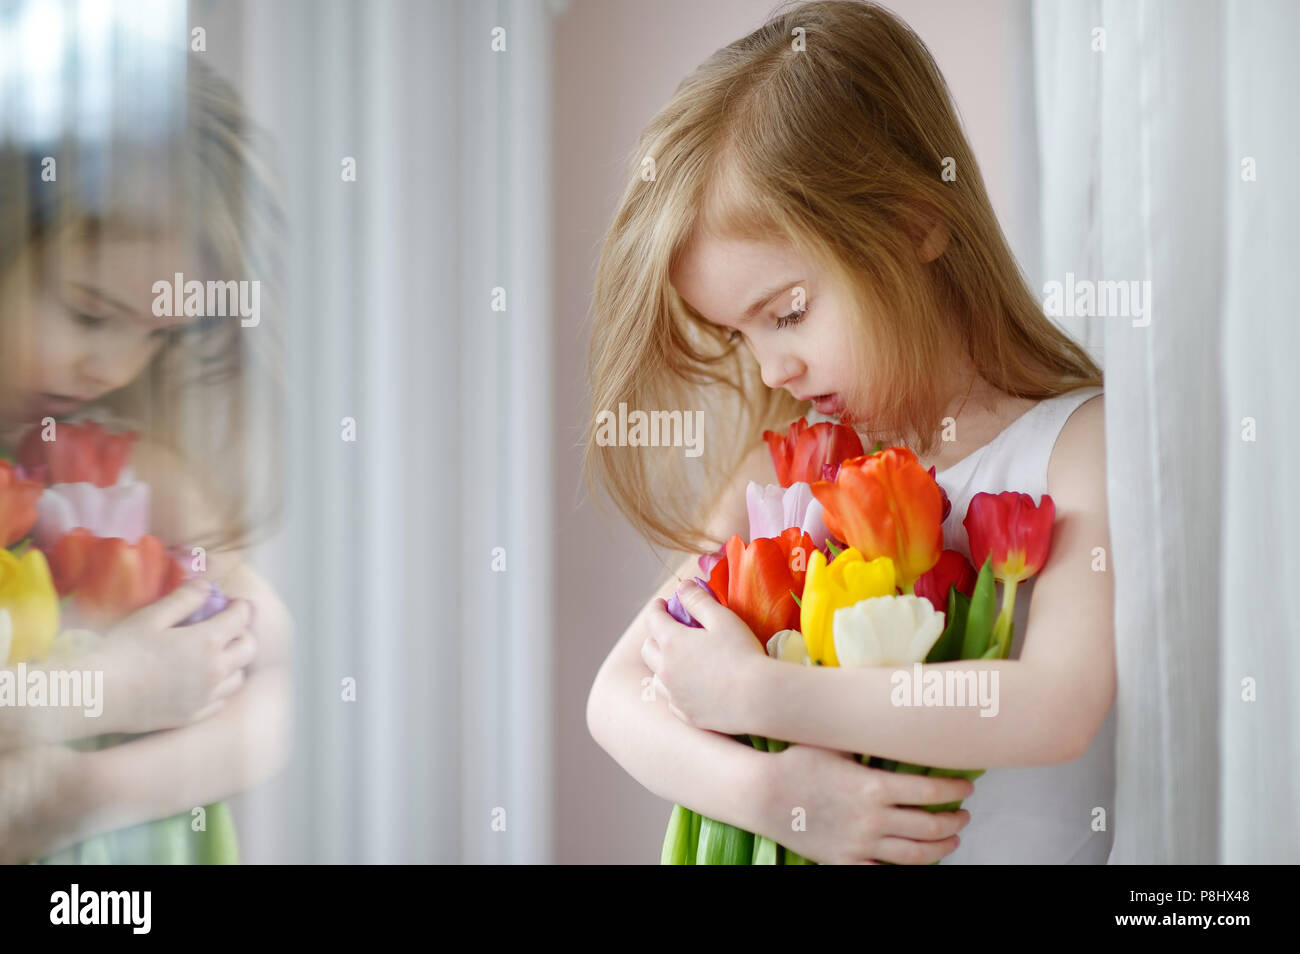 Adorable smiling little girl with tulips by the window Stock Photo